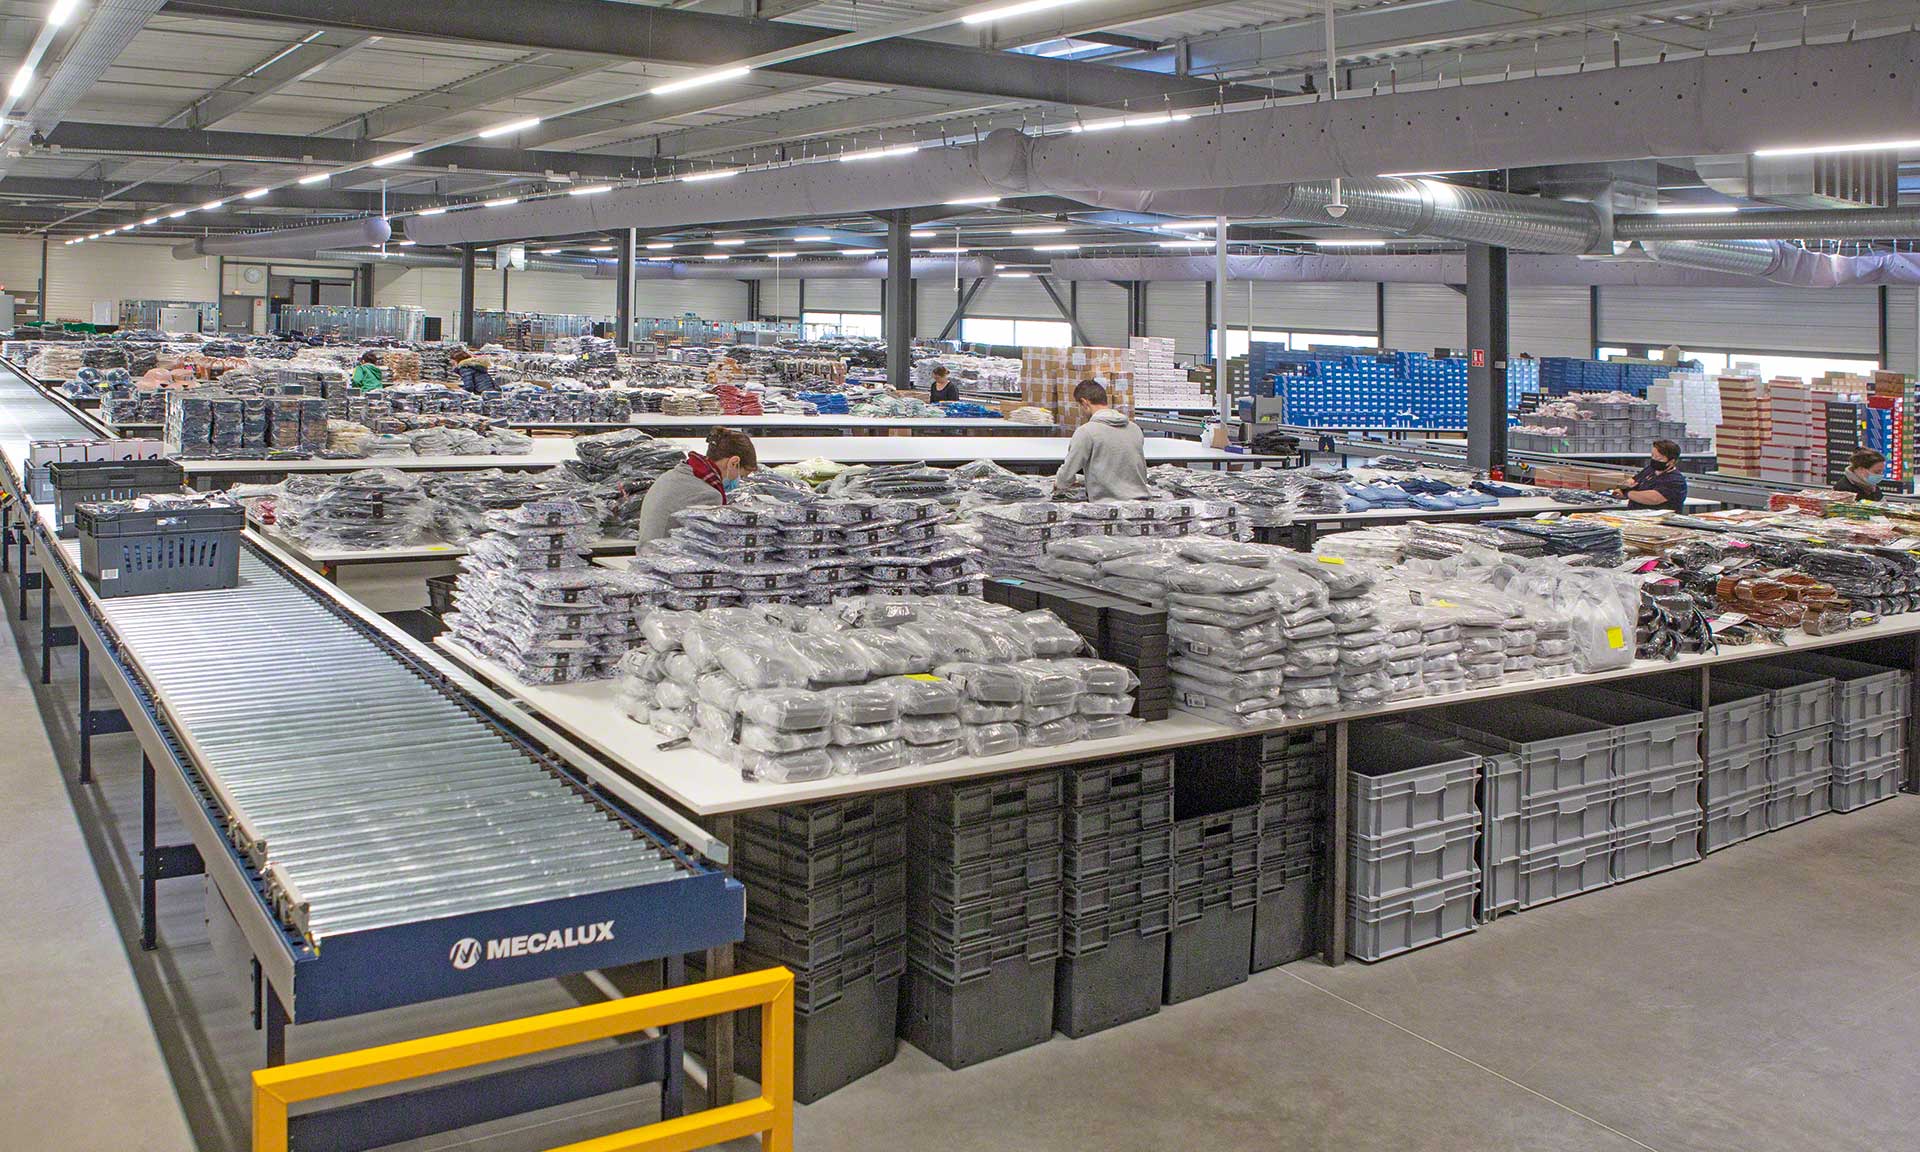 The main operation in an ecommerce warehouse is order picking